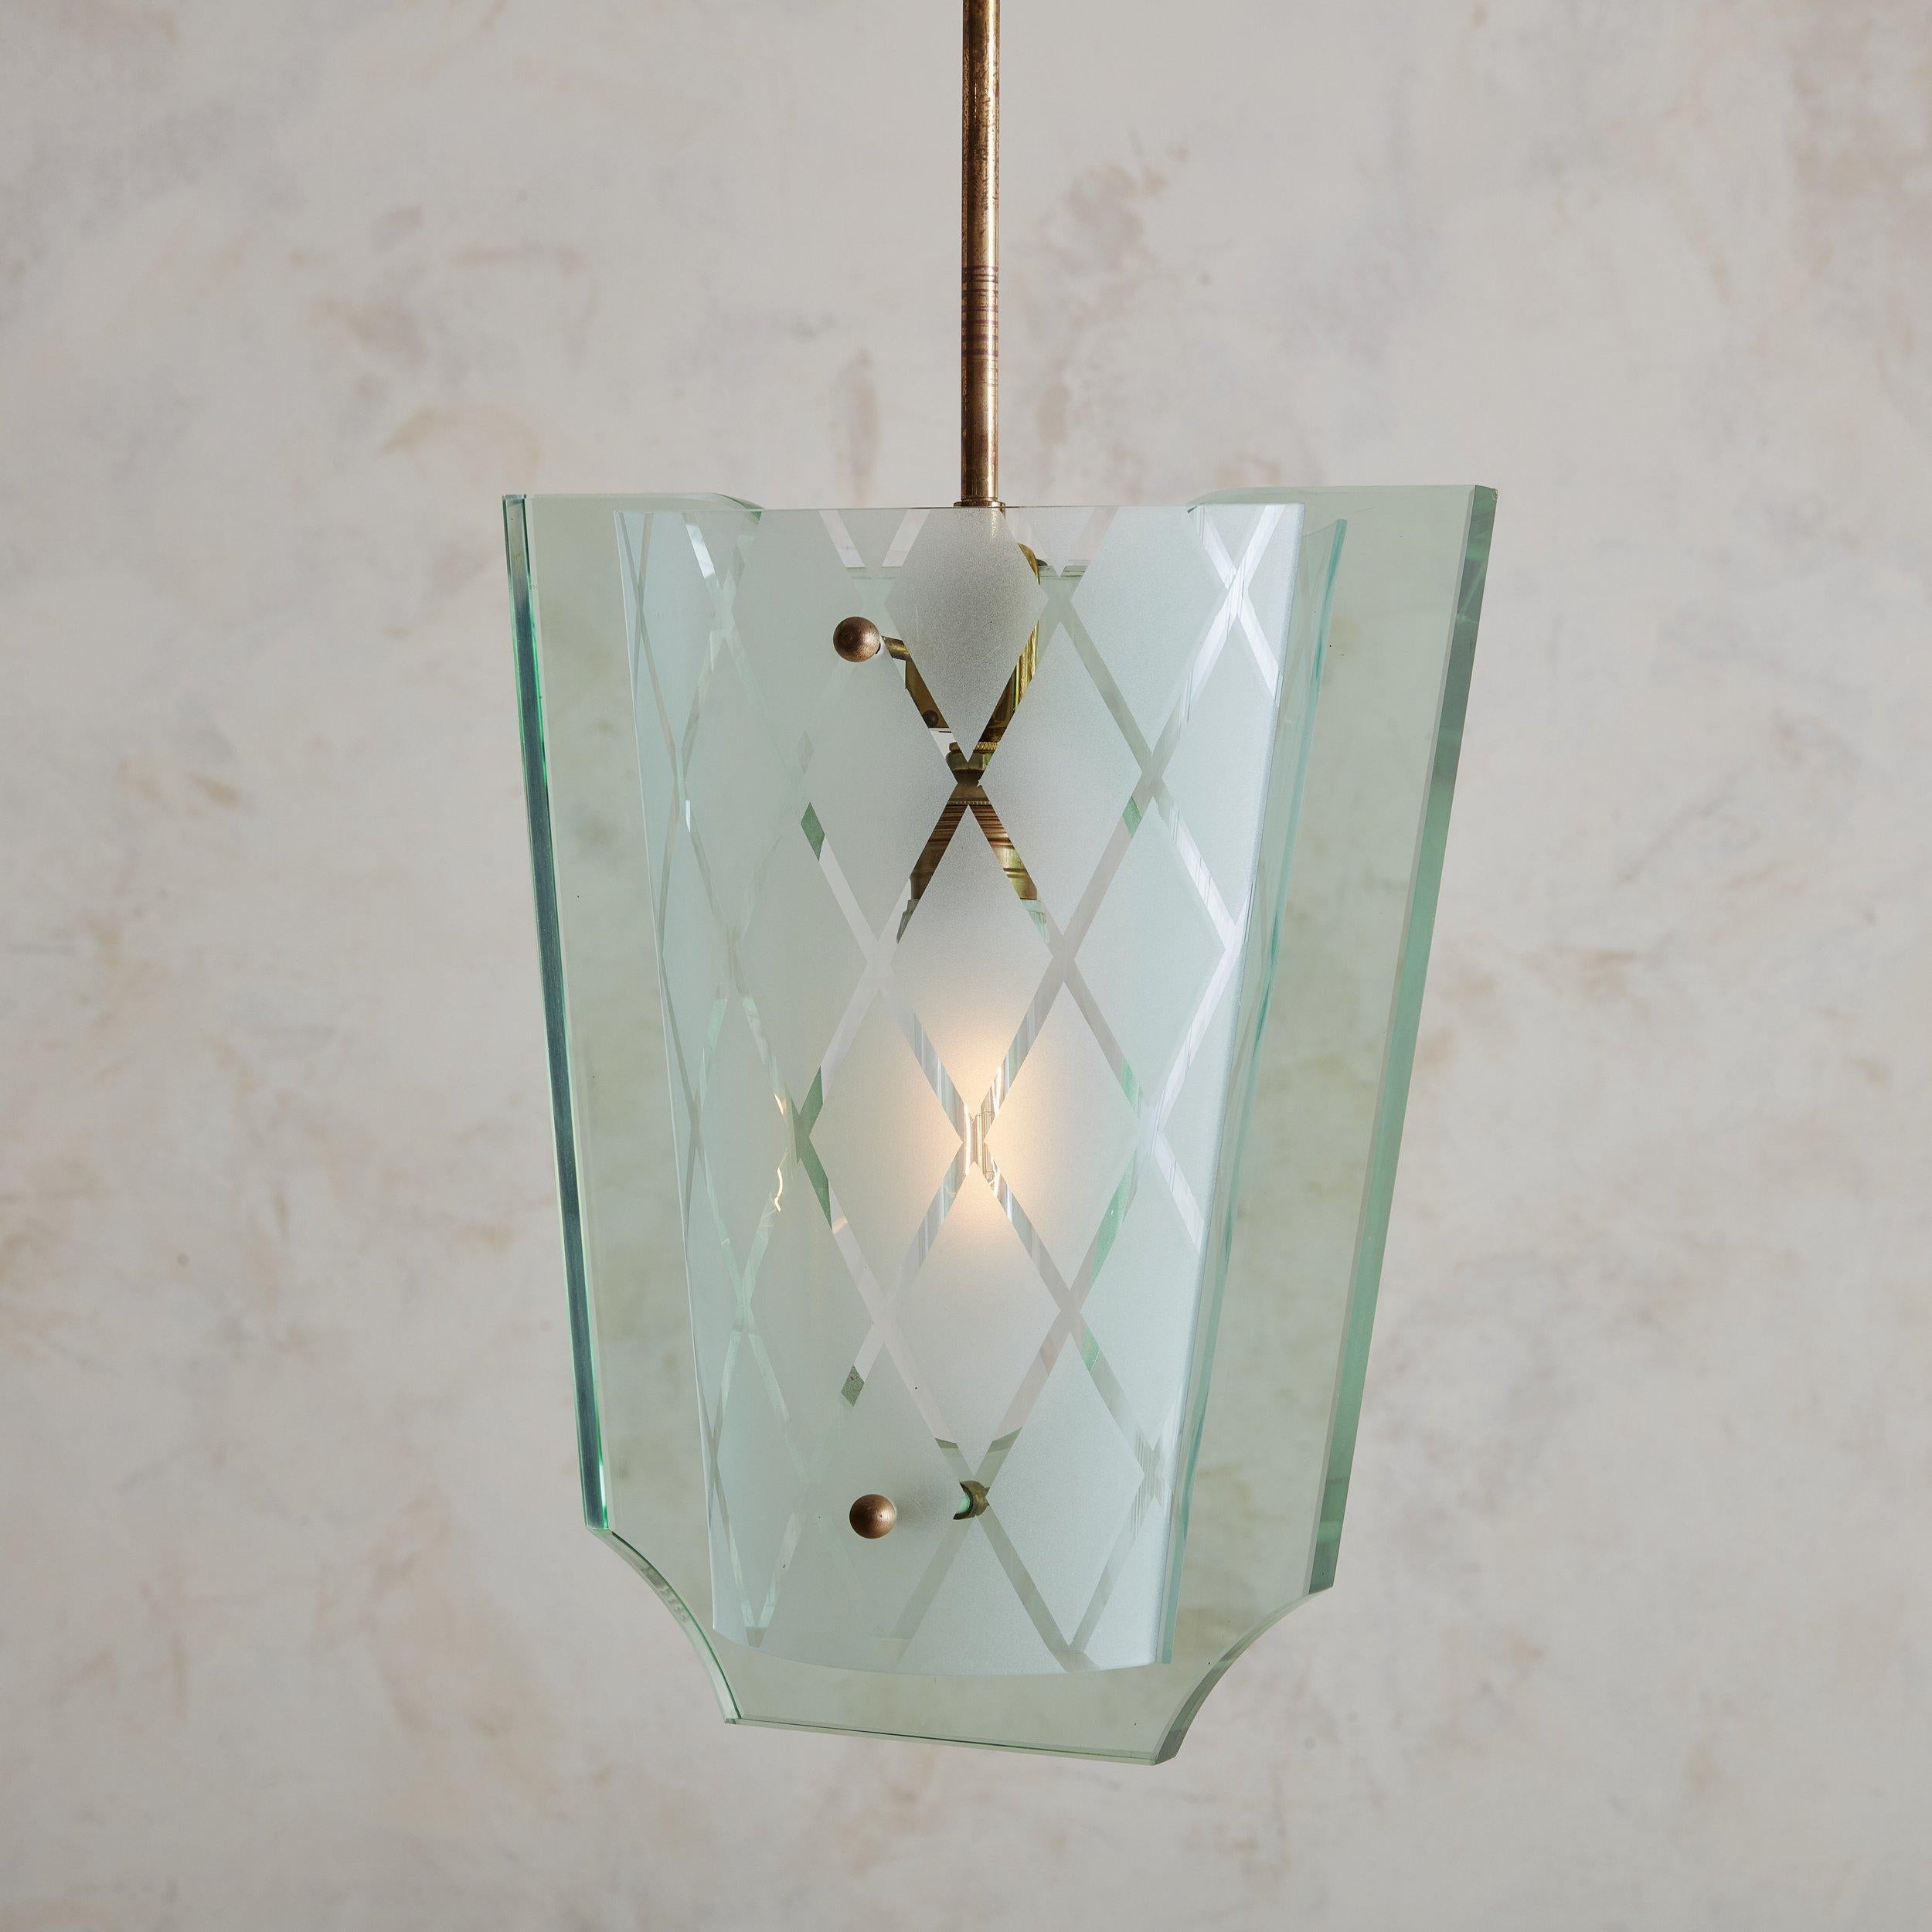 Mid-20th Century Italian Brass+Glass Pendant Light by Pietro Chiesa for Fontana Arte, Italy 1950s For Sale